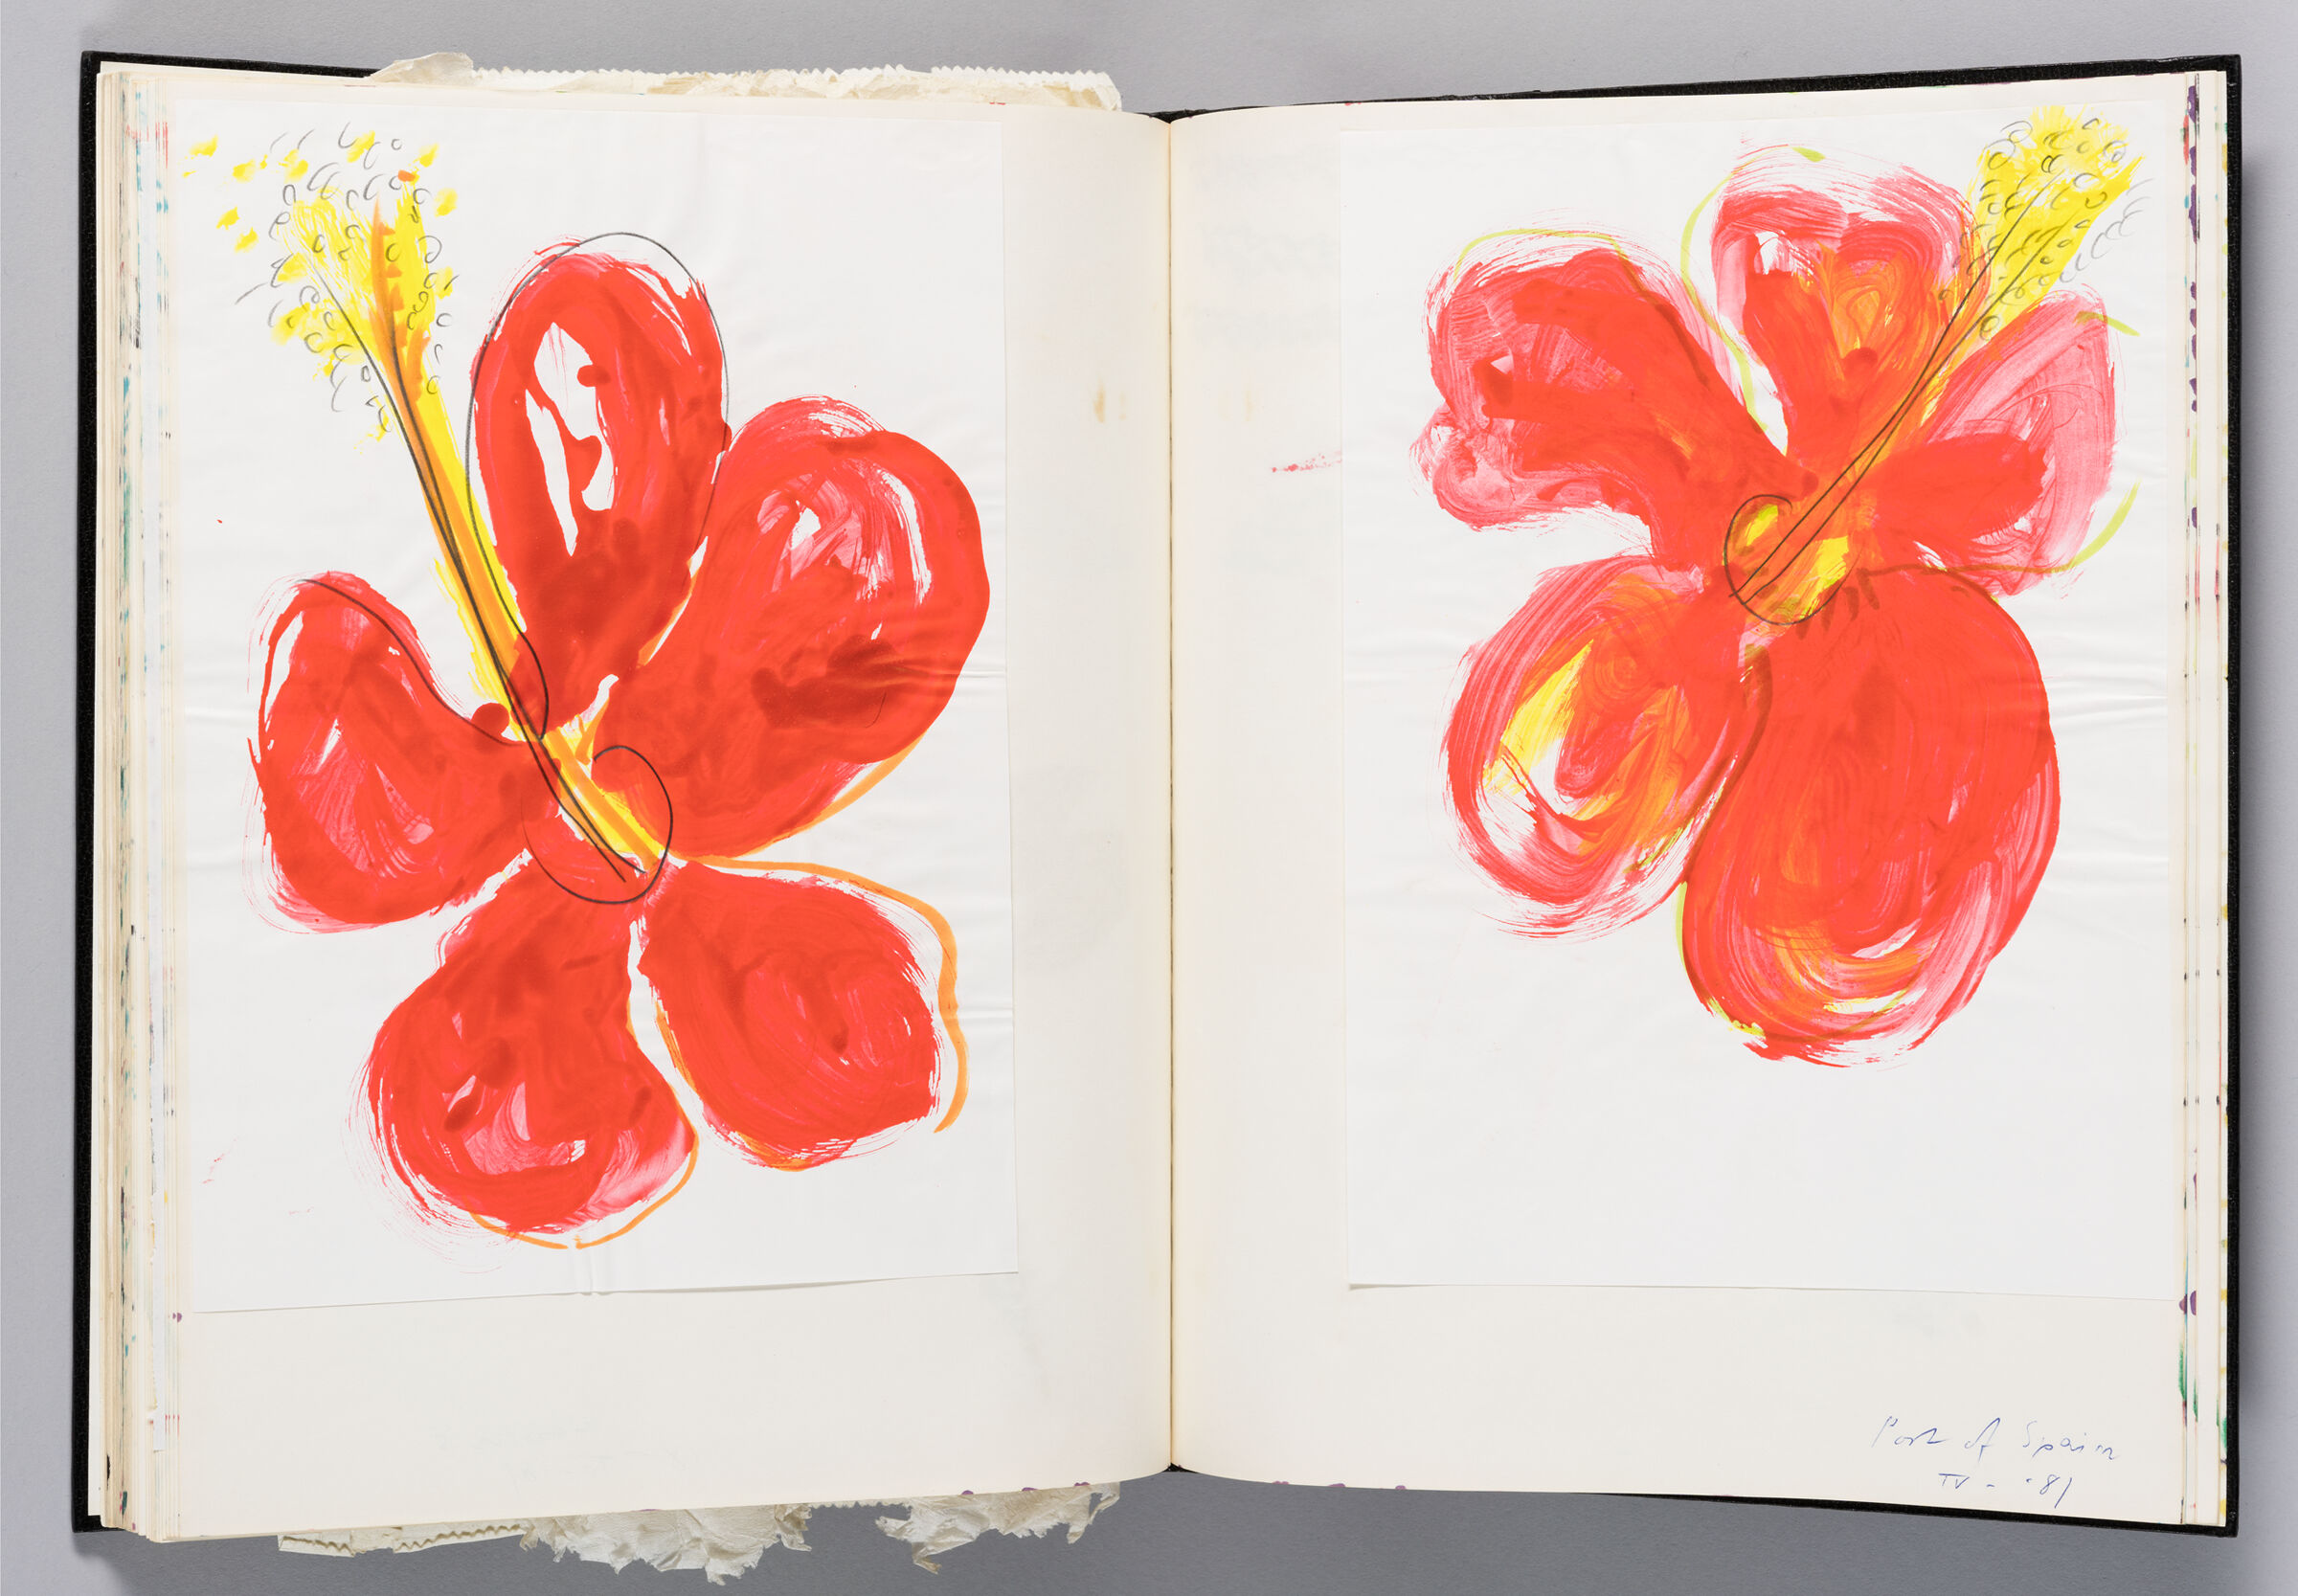 Untitled (Adhered Sketch Of Hibiscus Flower, Left Page); Untitled (Adhered Sketch Of Hibiscus Flower, Right Page)
